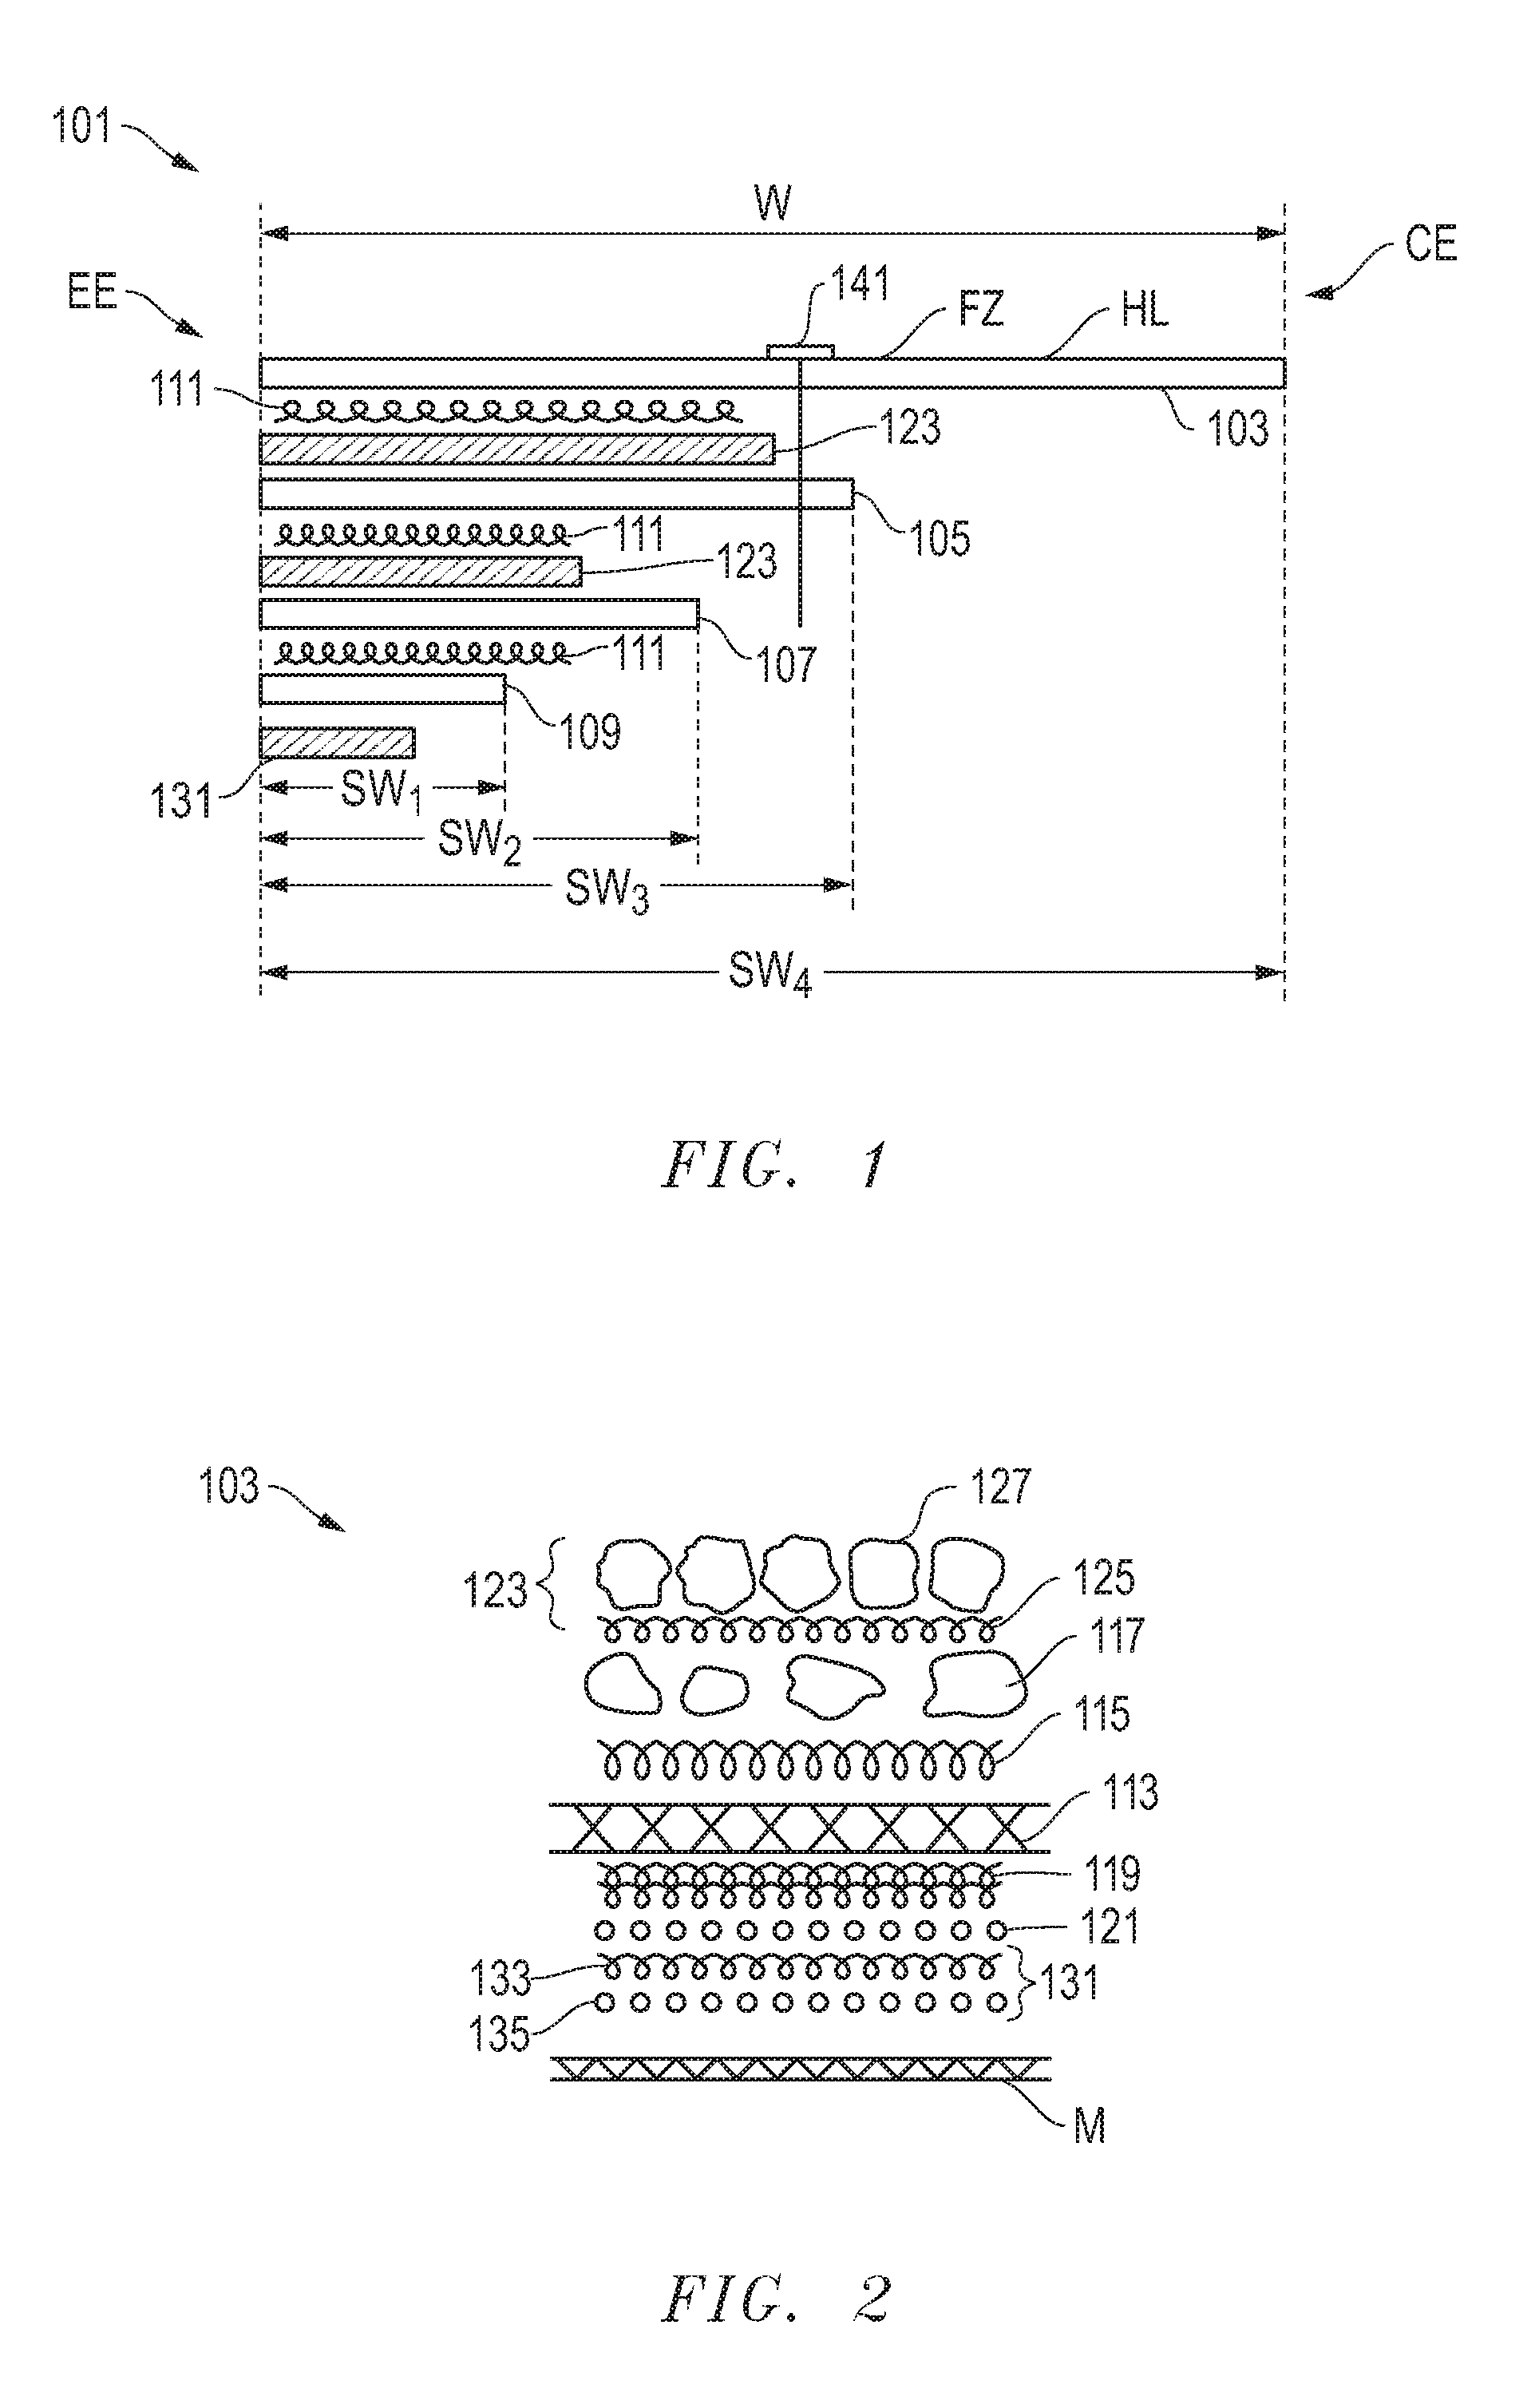 System, method and apparatus for wedge-shaped, multi-layer asphalt roofing